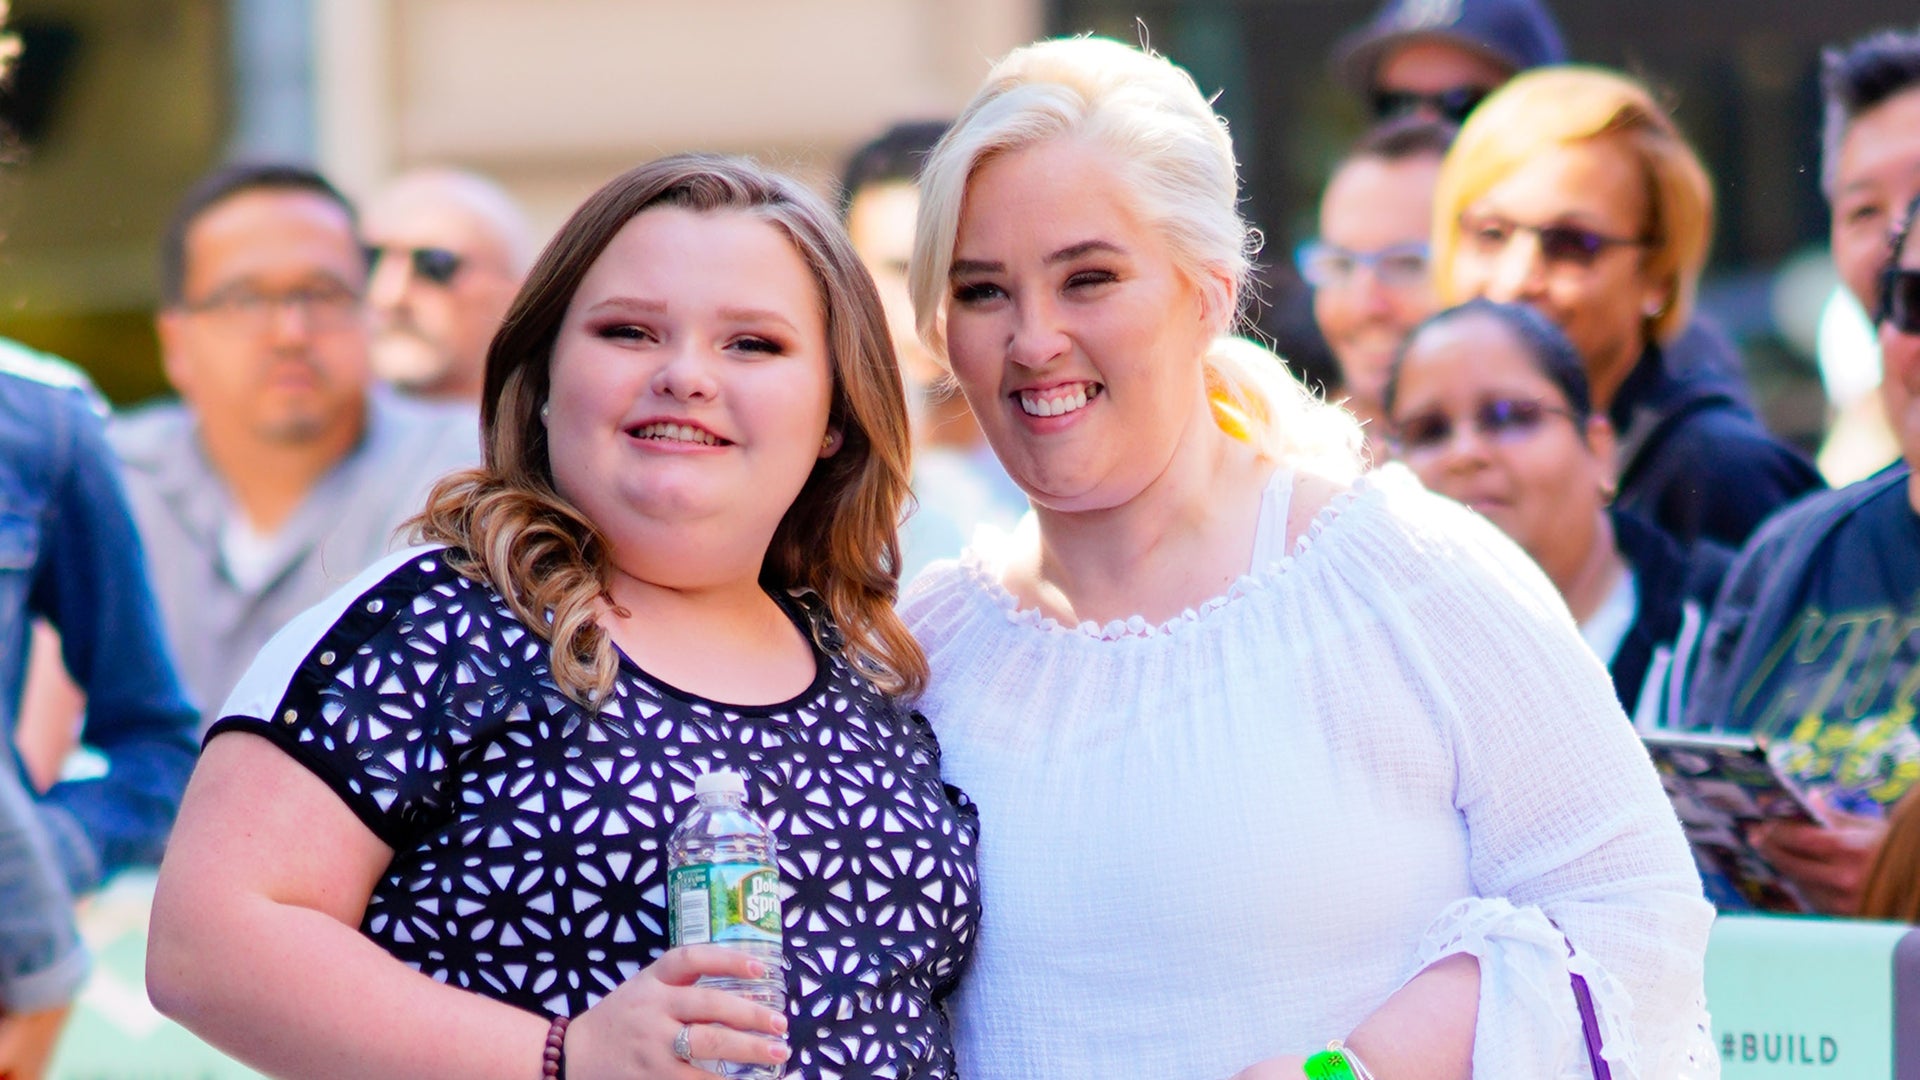 Honey Boo Boo and Mama June at AOL Build on June 11, 2018 in New York City.